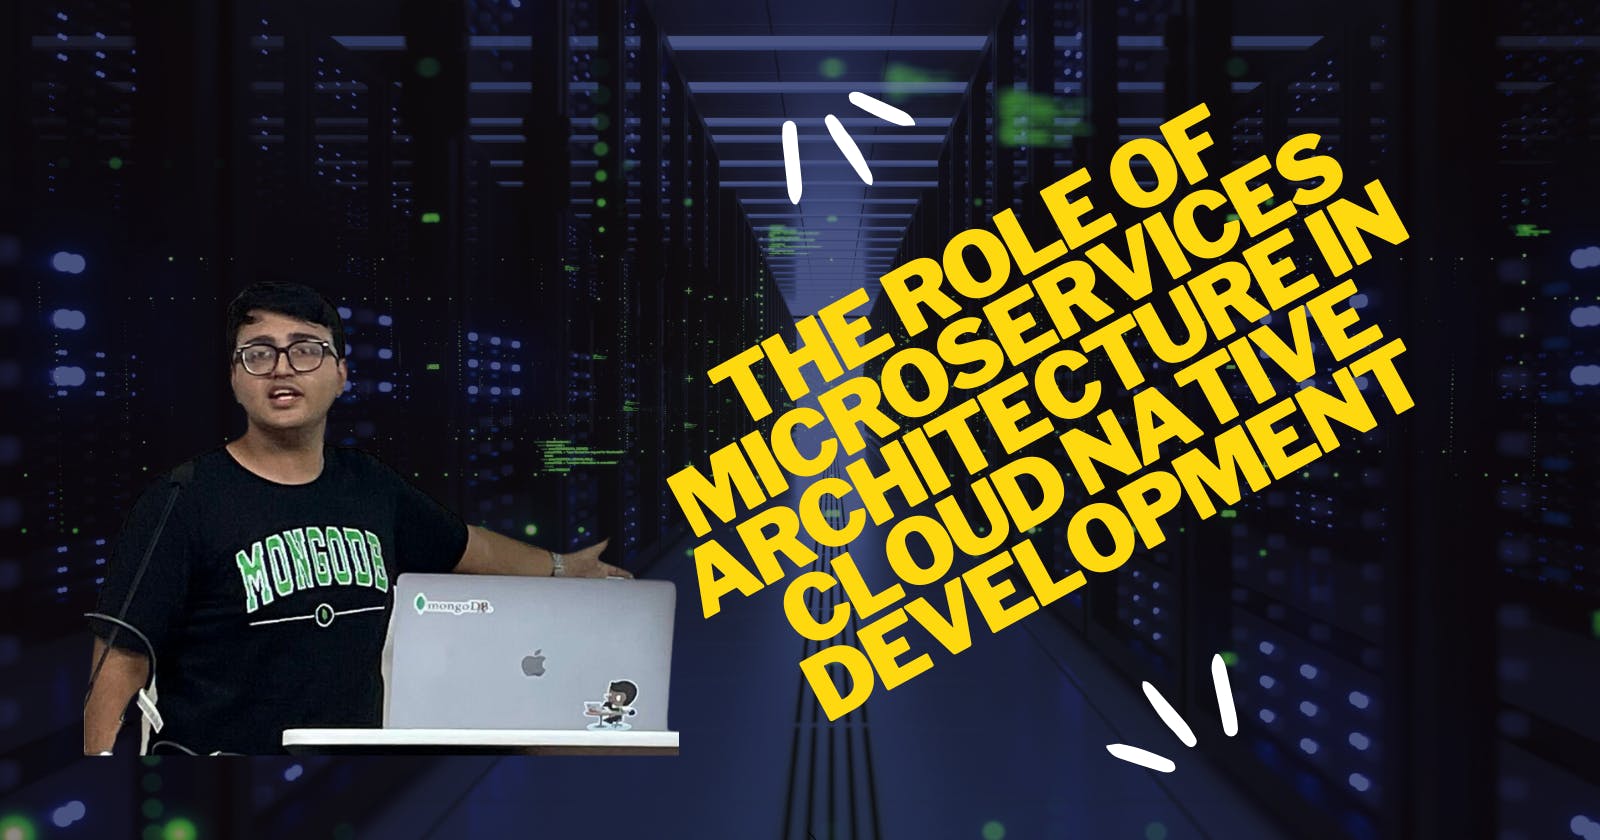 The role of microservices architecture in Cloud Native development